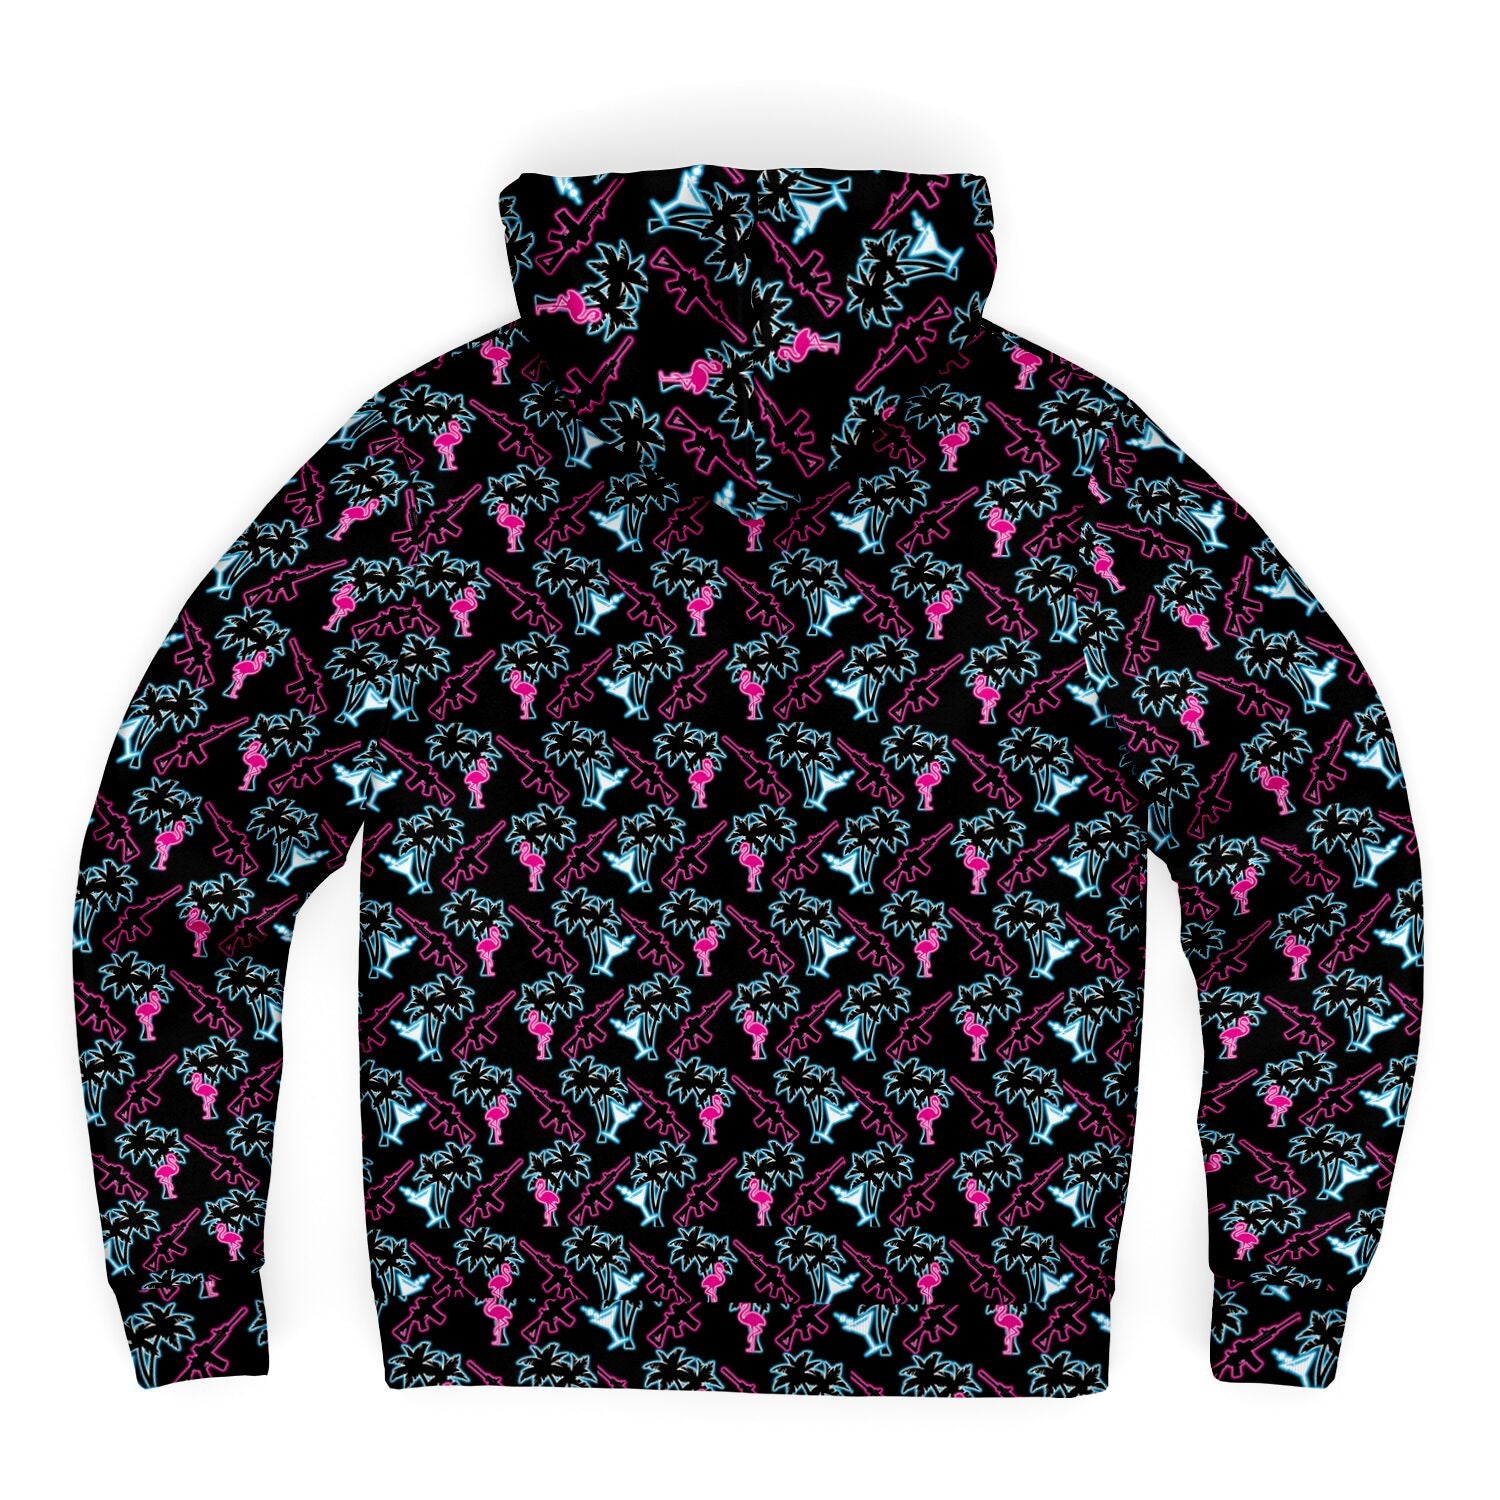 Rad Palm Neon Attack Fleece Lined Hoodie